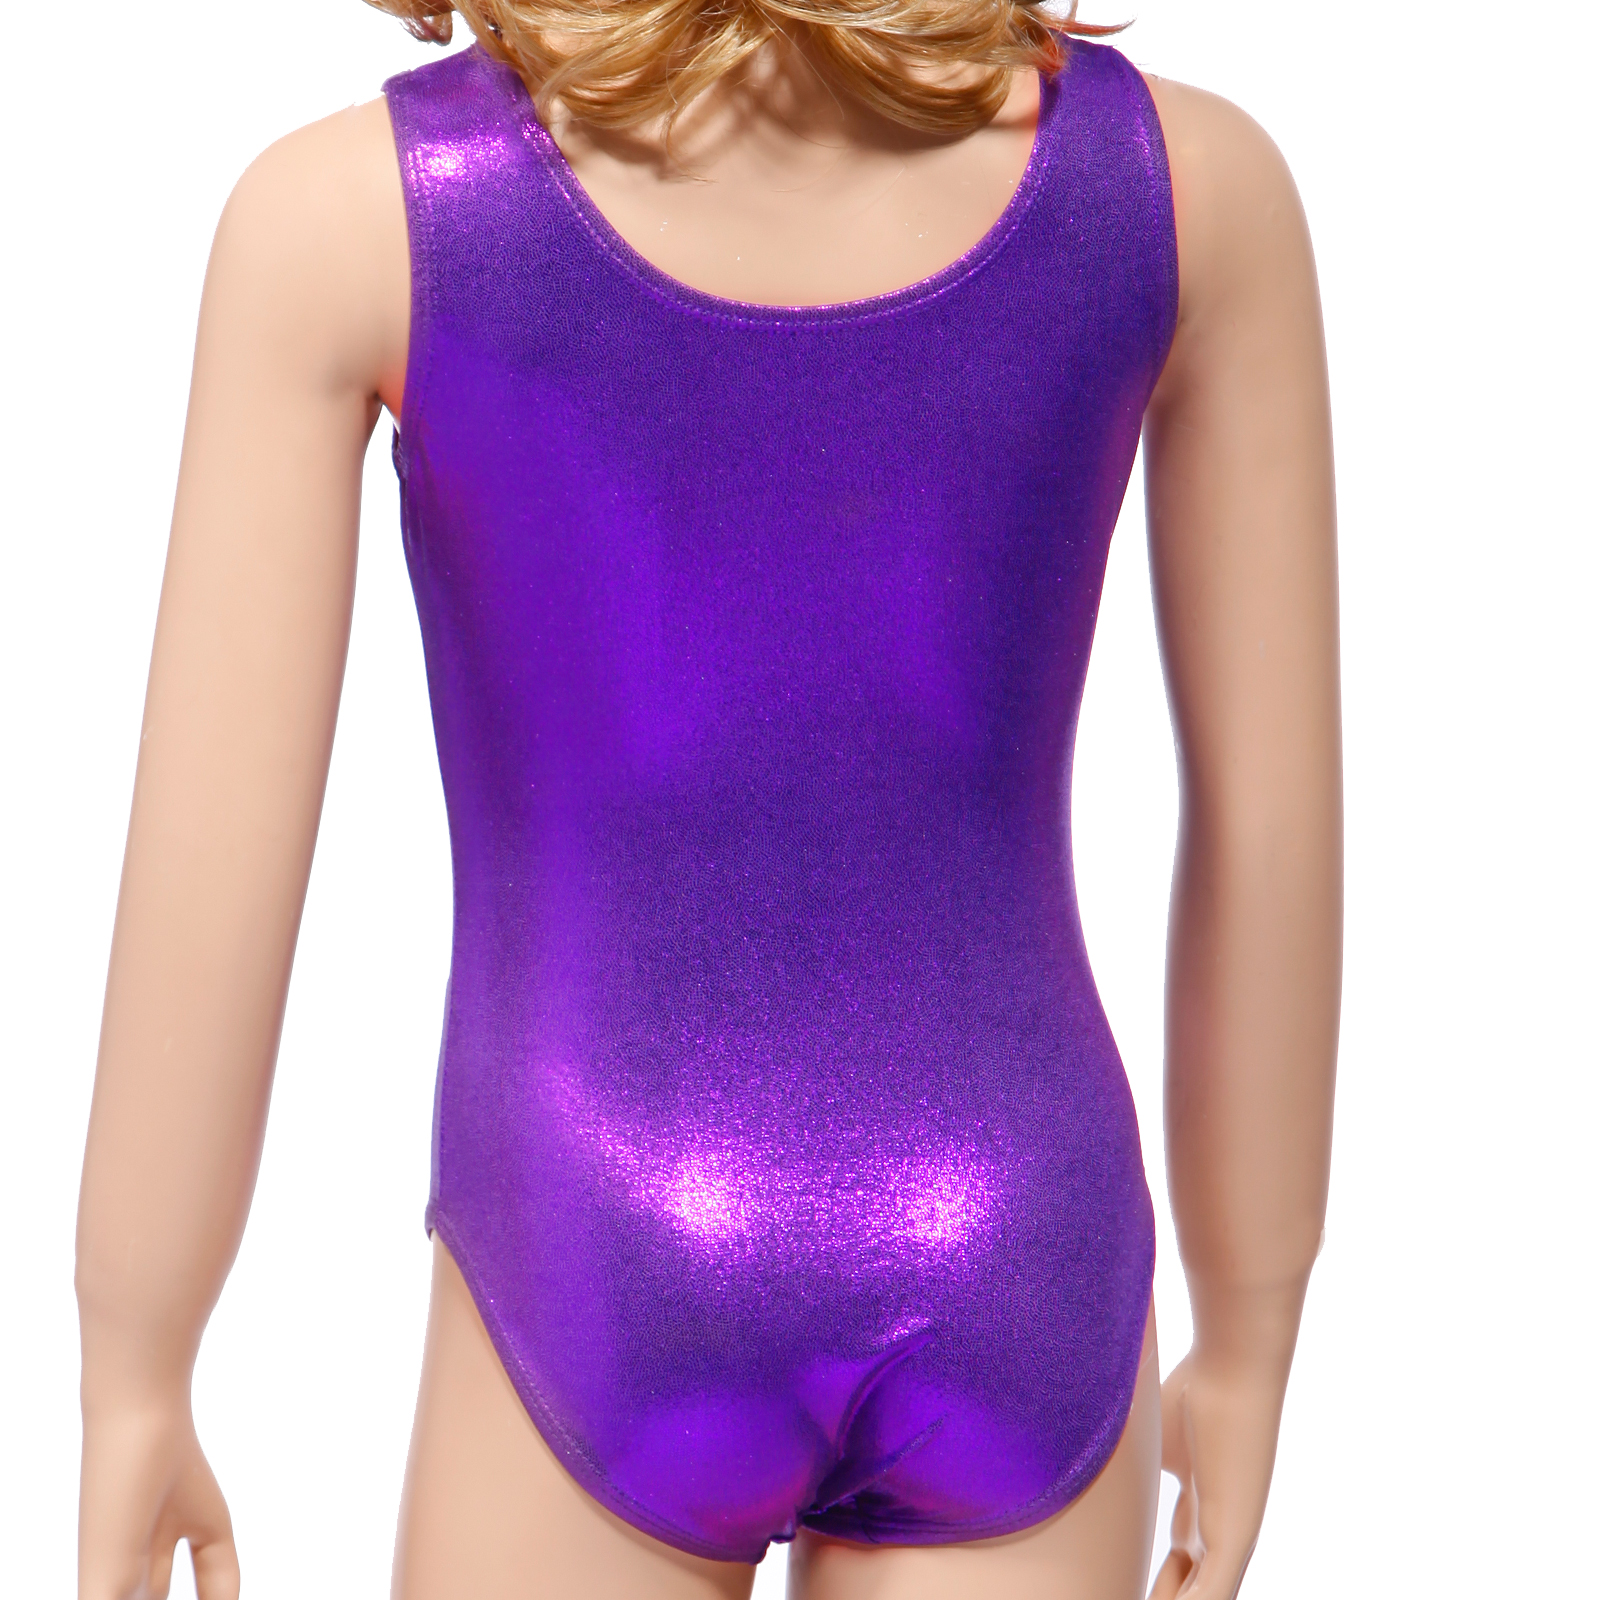 More related shiny leotards for girls cute.